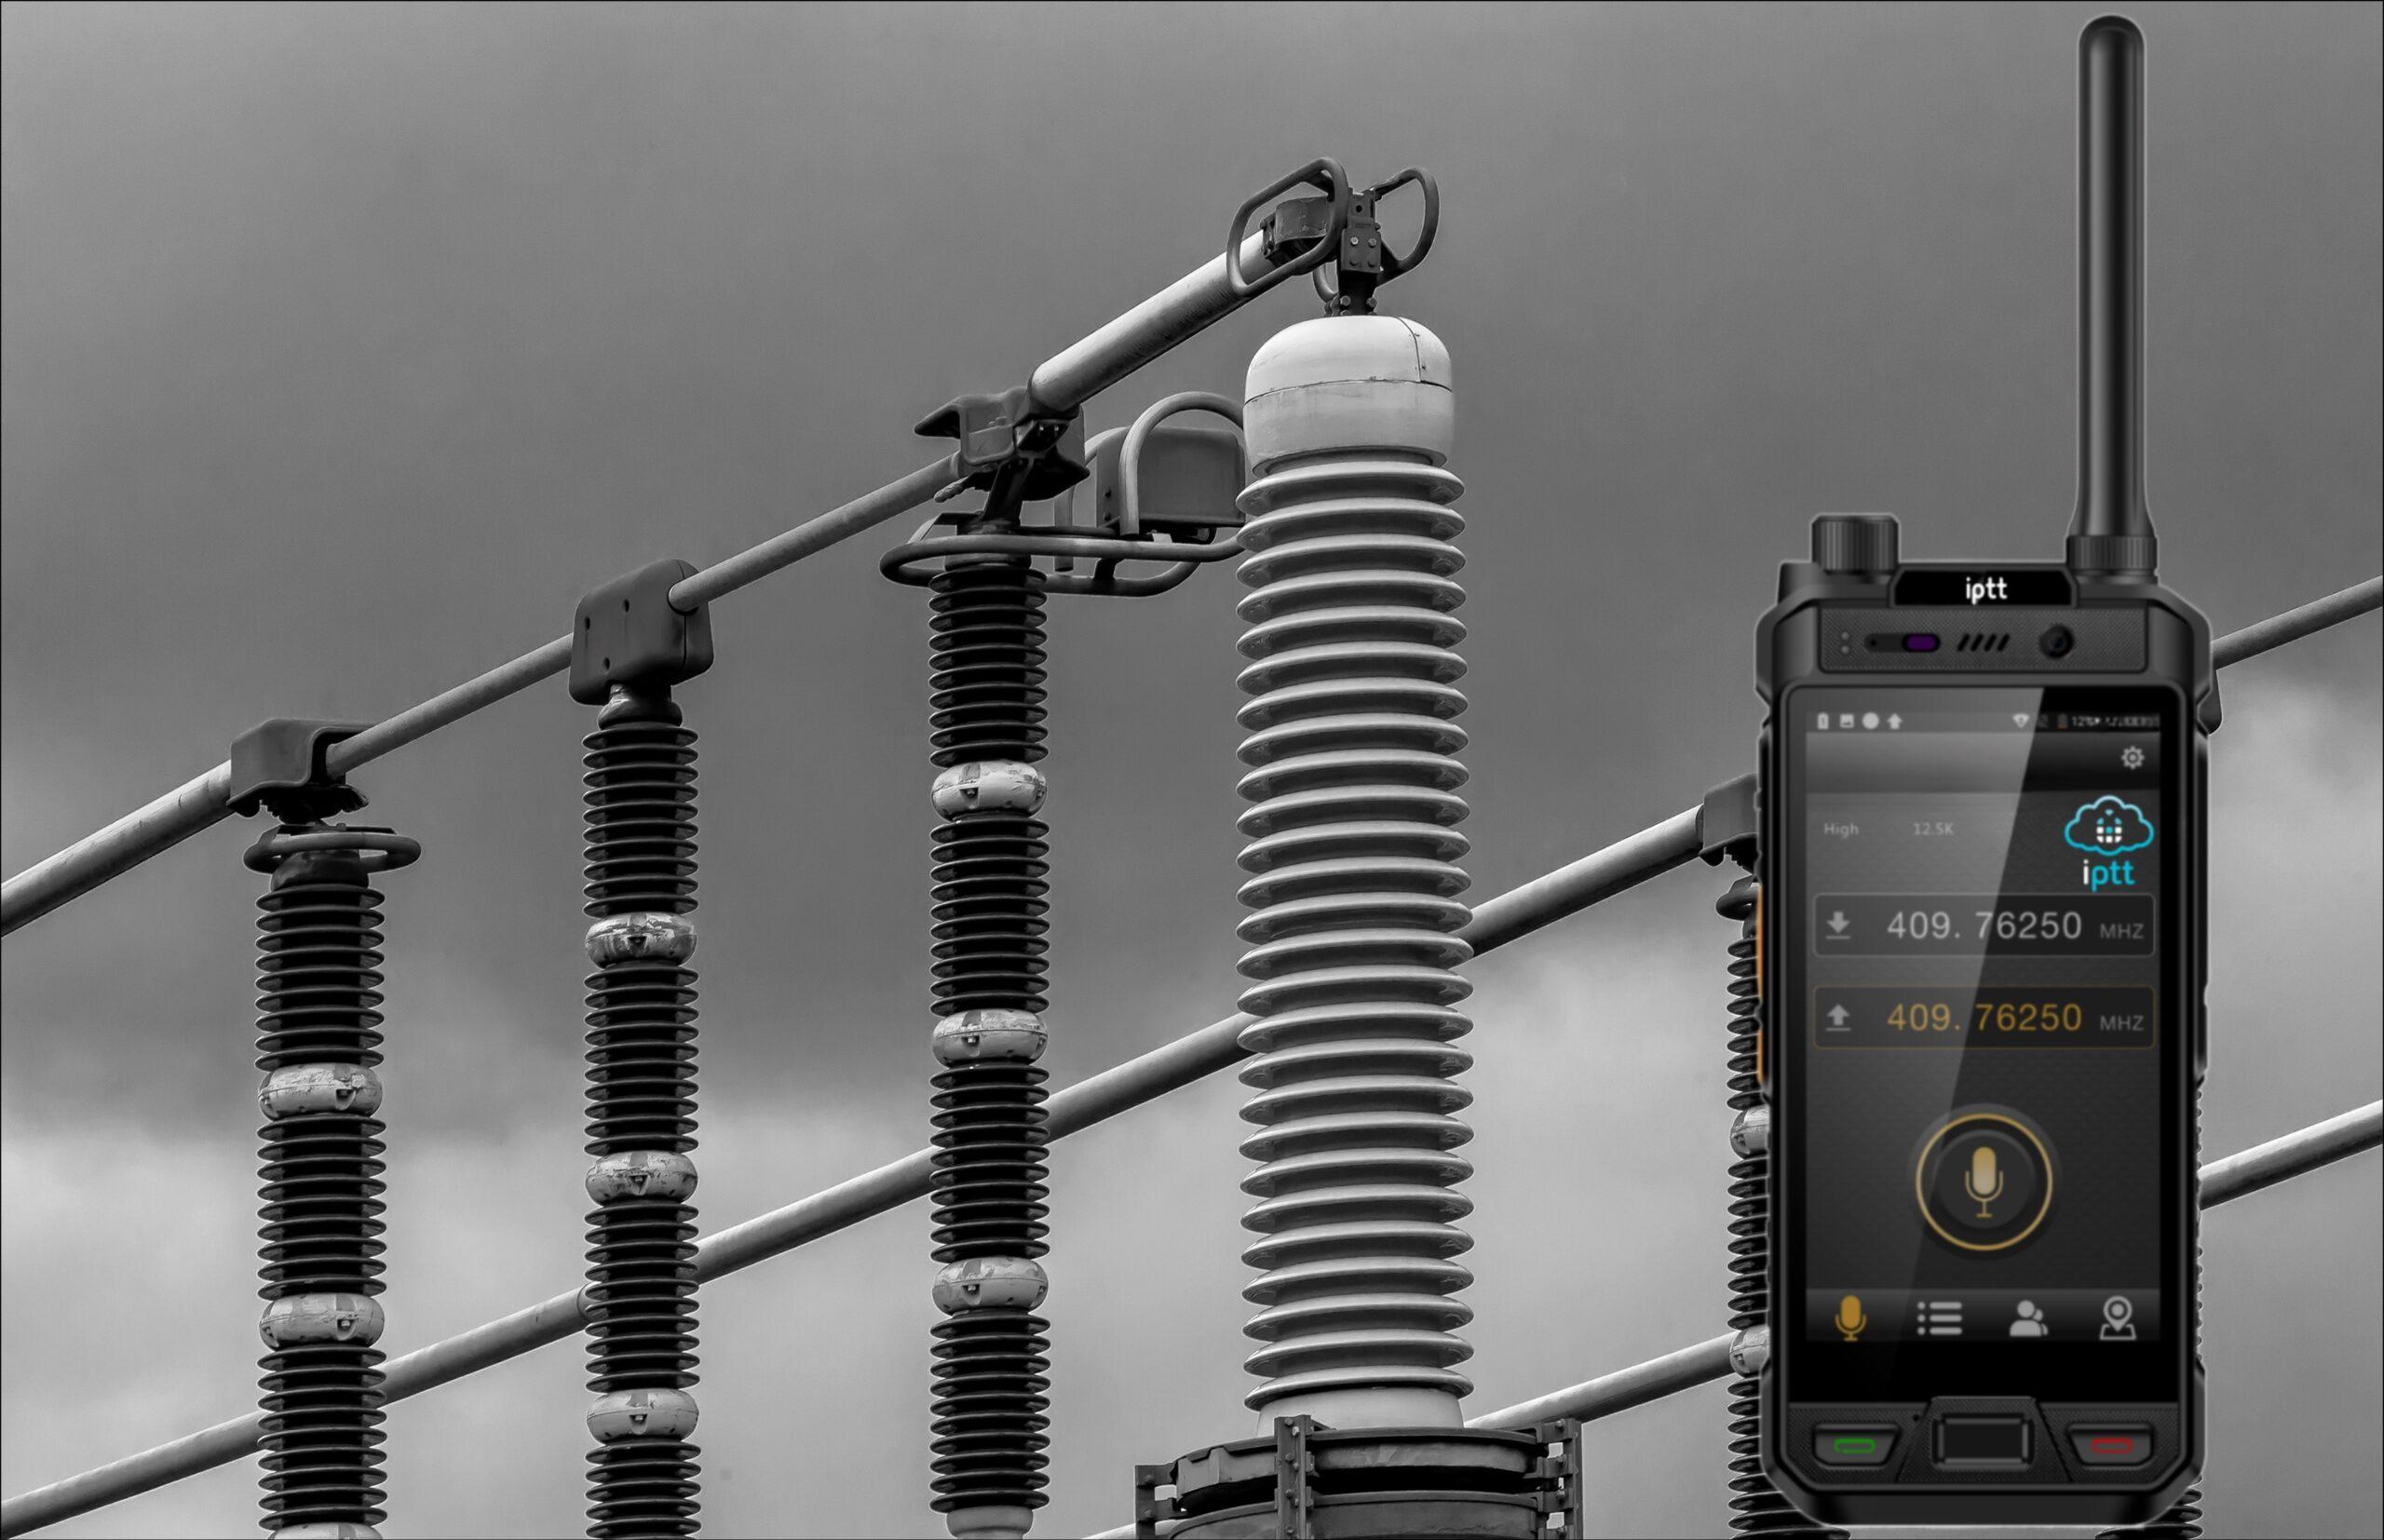 Featured image for “Radios for Energy Operations”